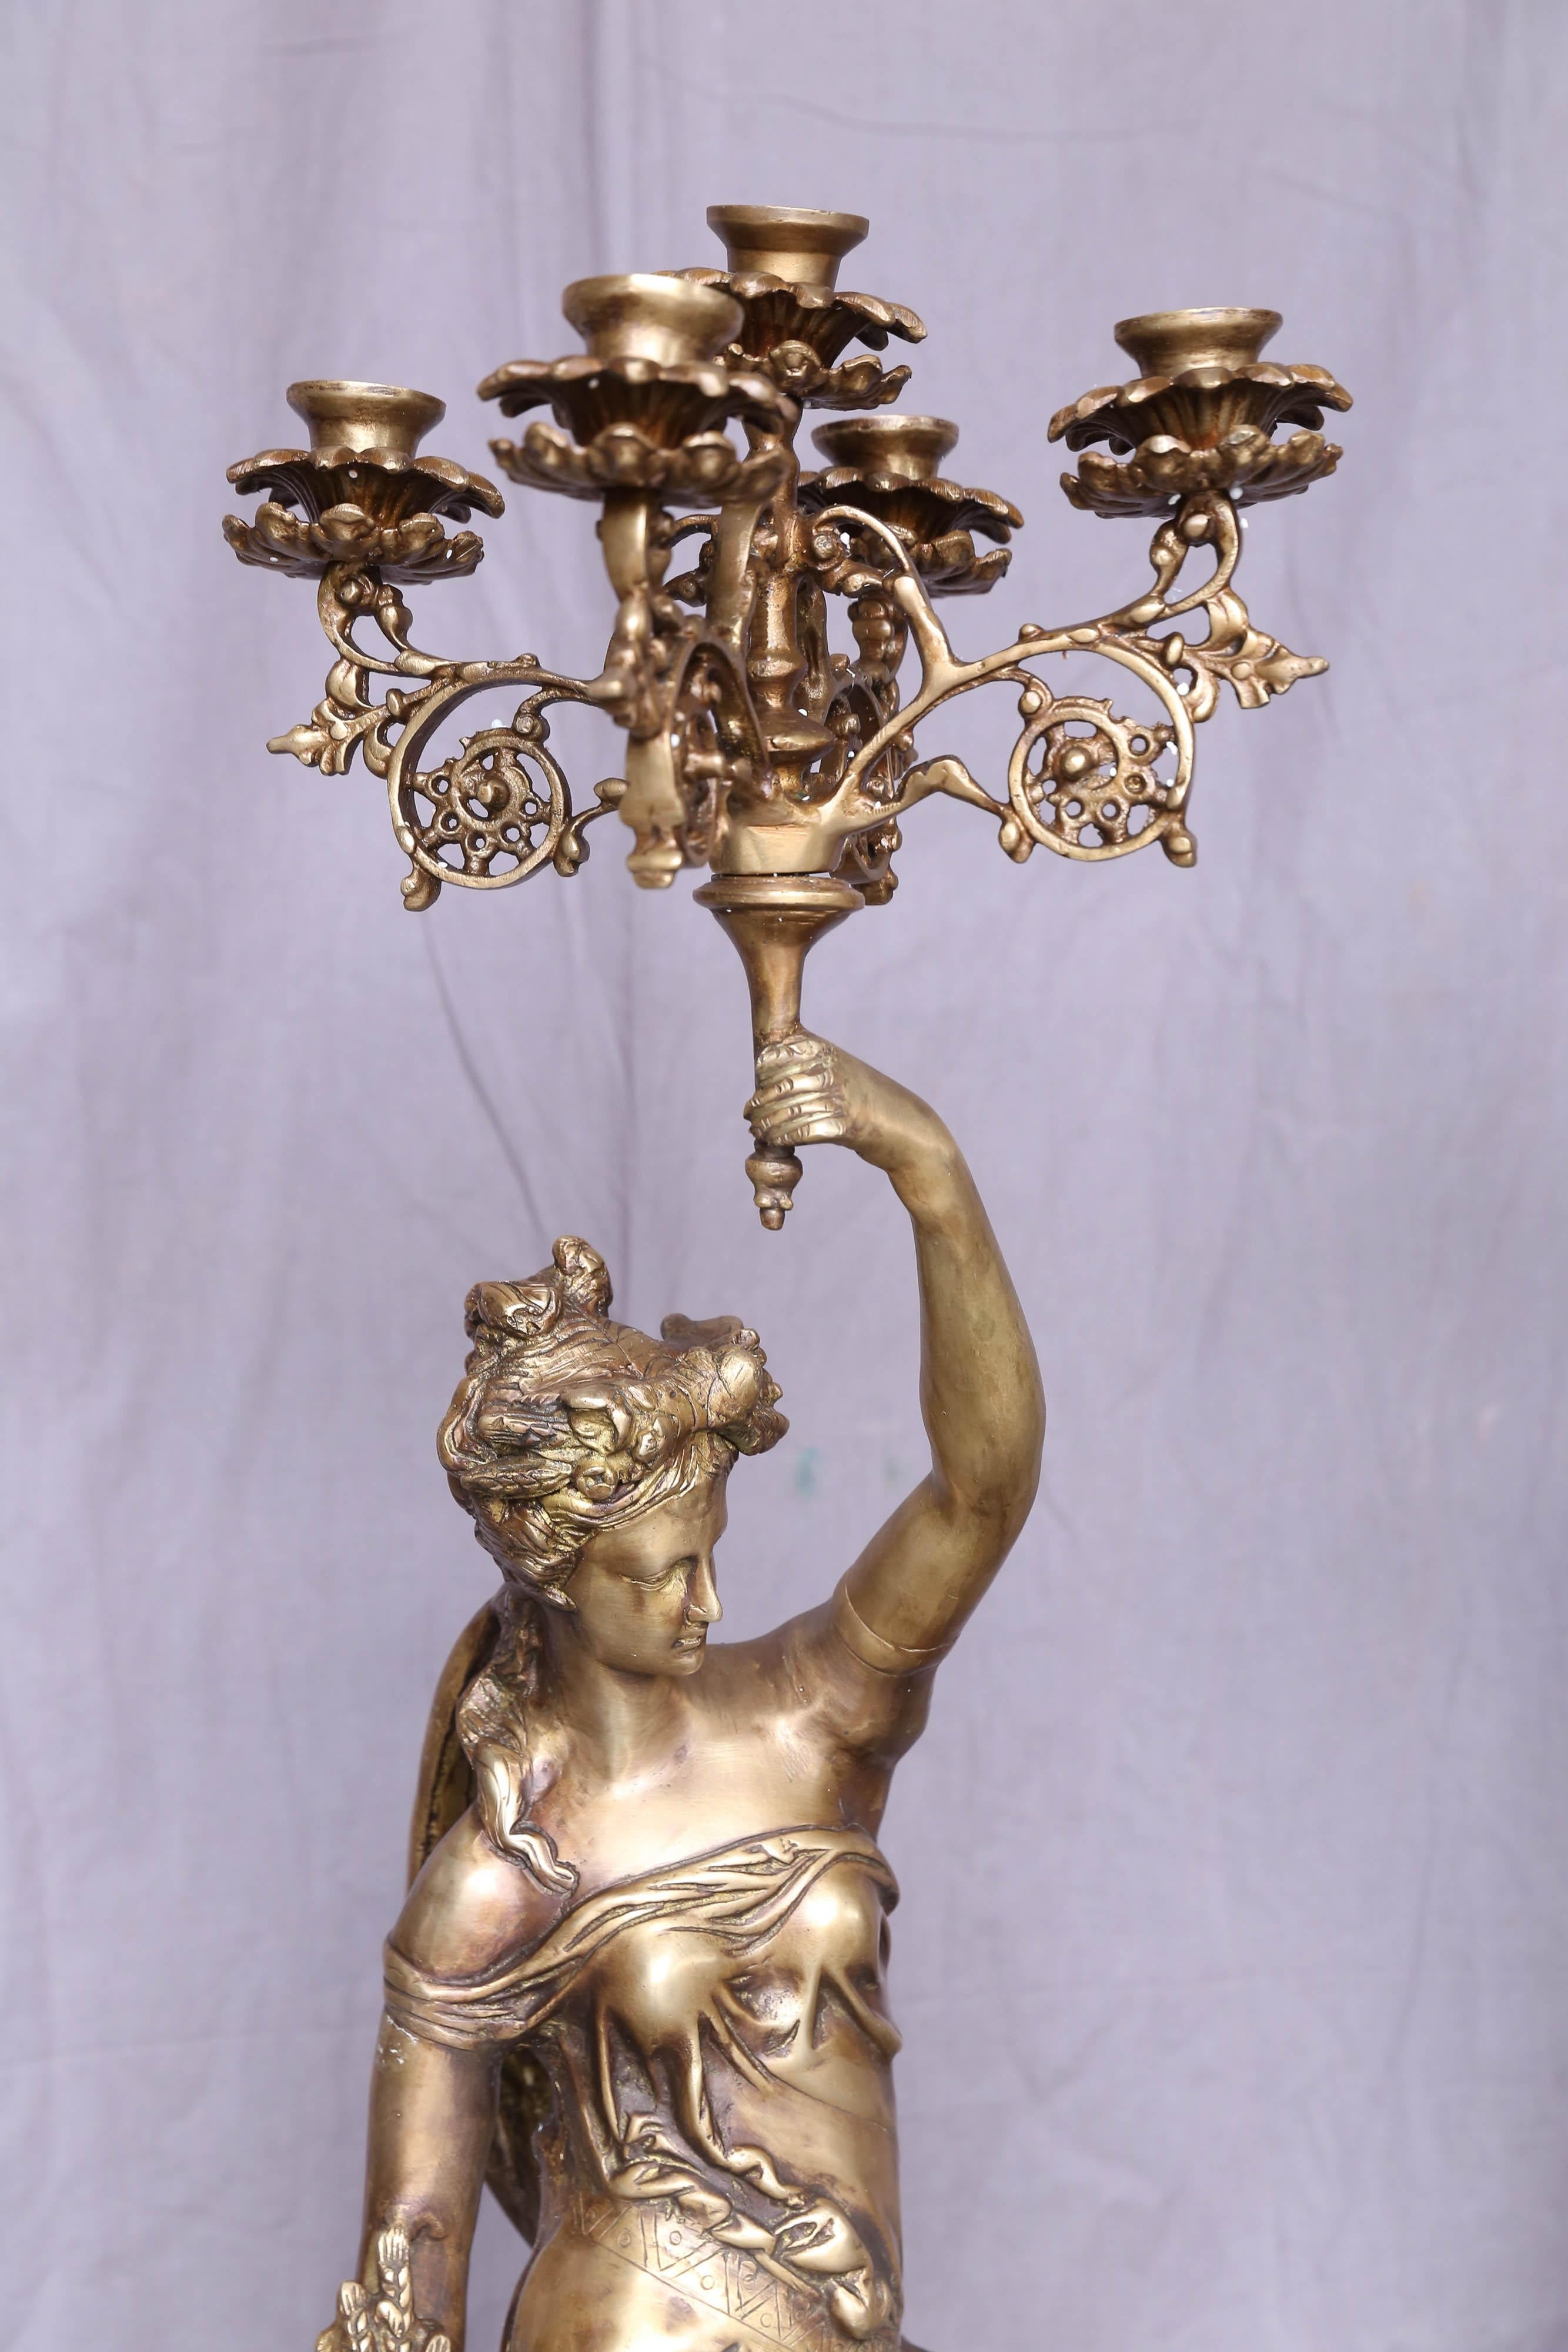 These fine hand cast bronze ladies holding candelabras were made in the late 20th century. These pieces will adorn any entry hall. These can be used also in front of fire places. After casting these figures were hand chiseled to get the right form